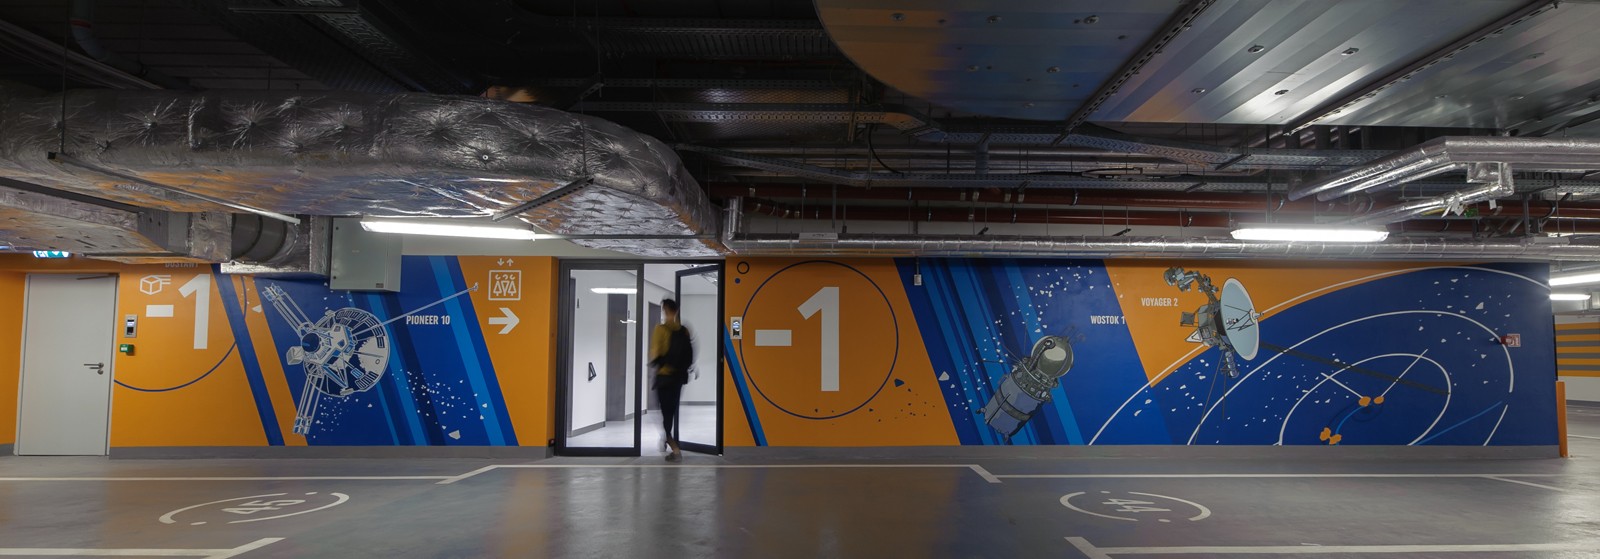 Wall design in Proximo office building in Warsaw’s Wola district with a painted Pioneer 10 satellite, a Wostok 1 spaceship, and a Voyager 2 space shuttle | PROXIMO | Portfolio